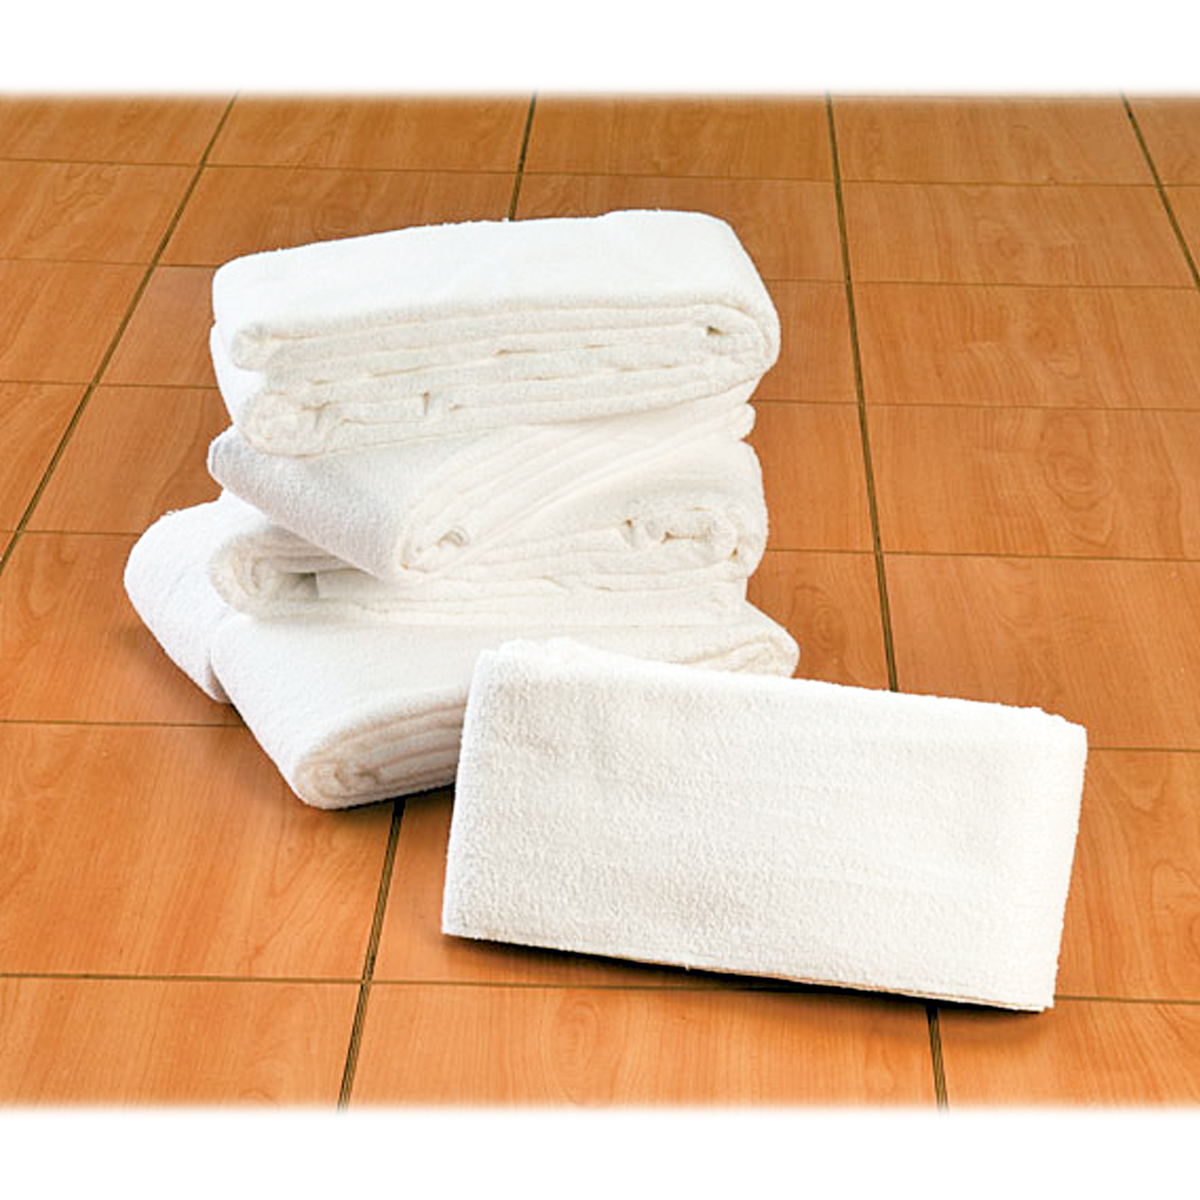 ONE - 6' Courtclean Towel Only for Basketball Court Damp Mop